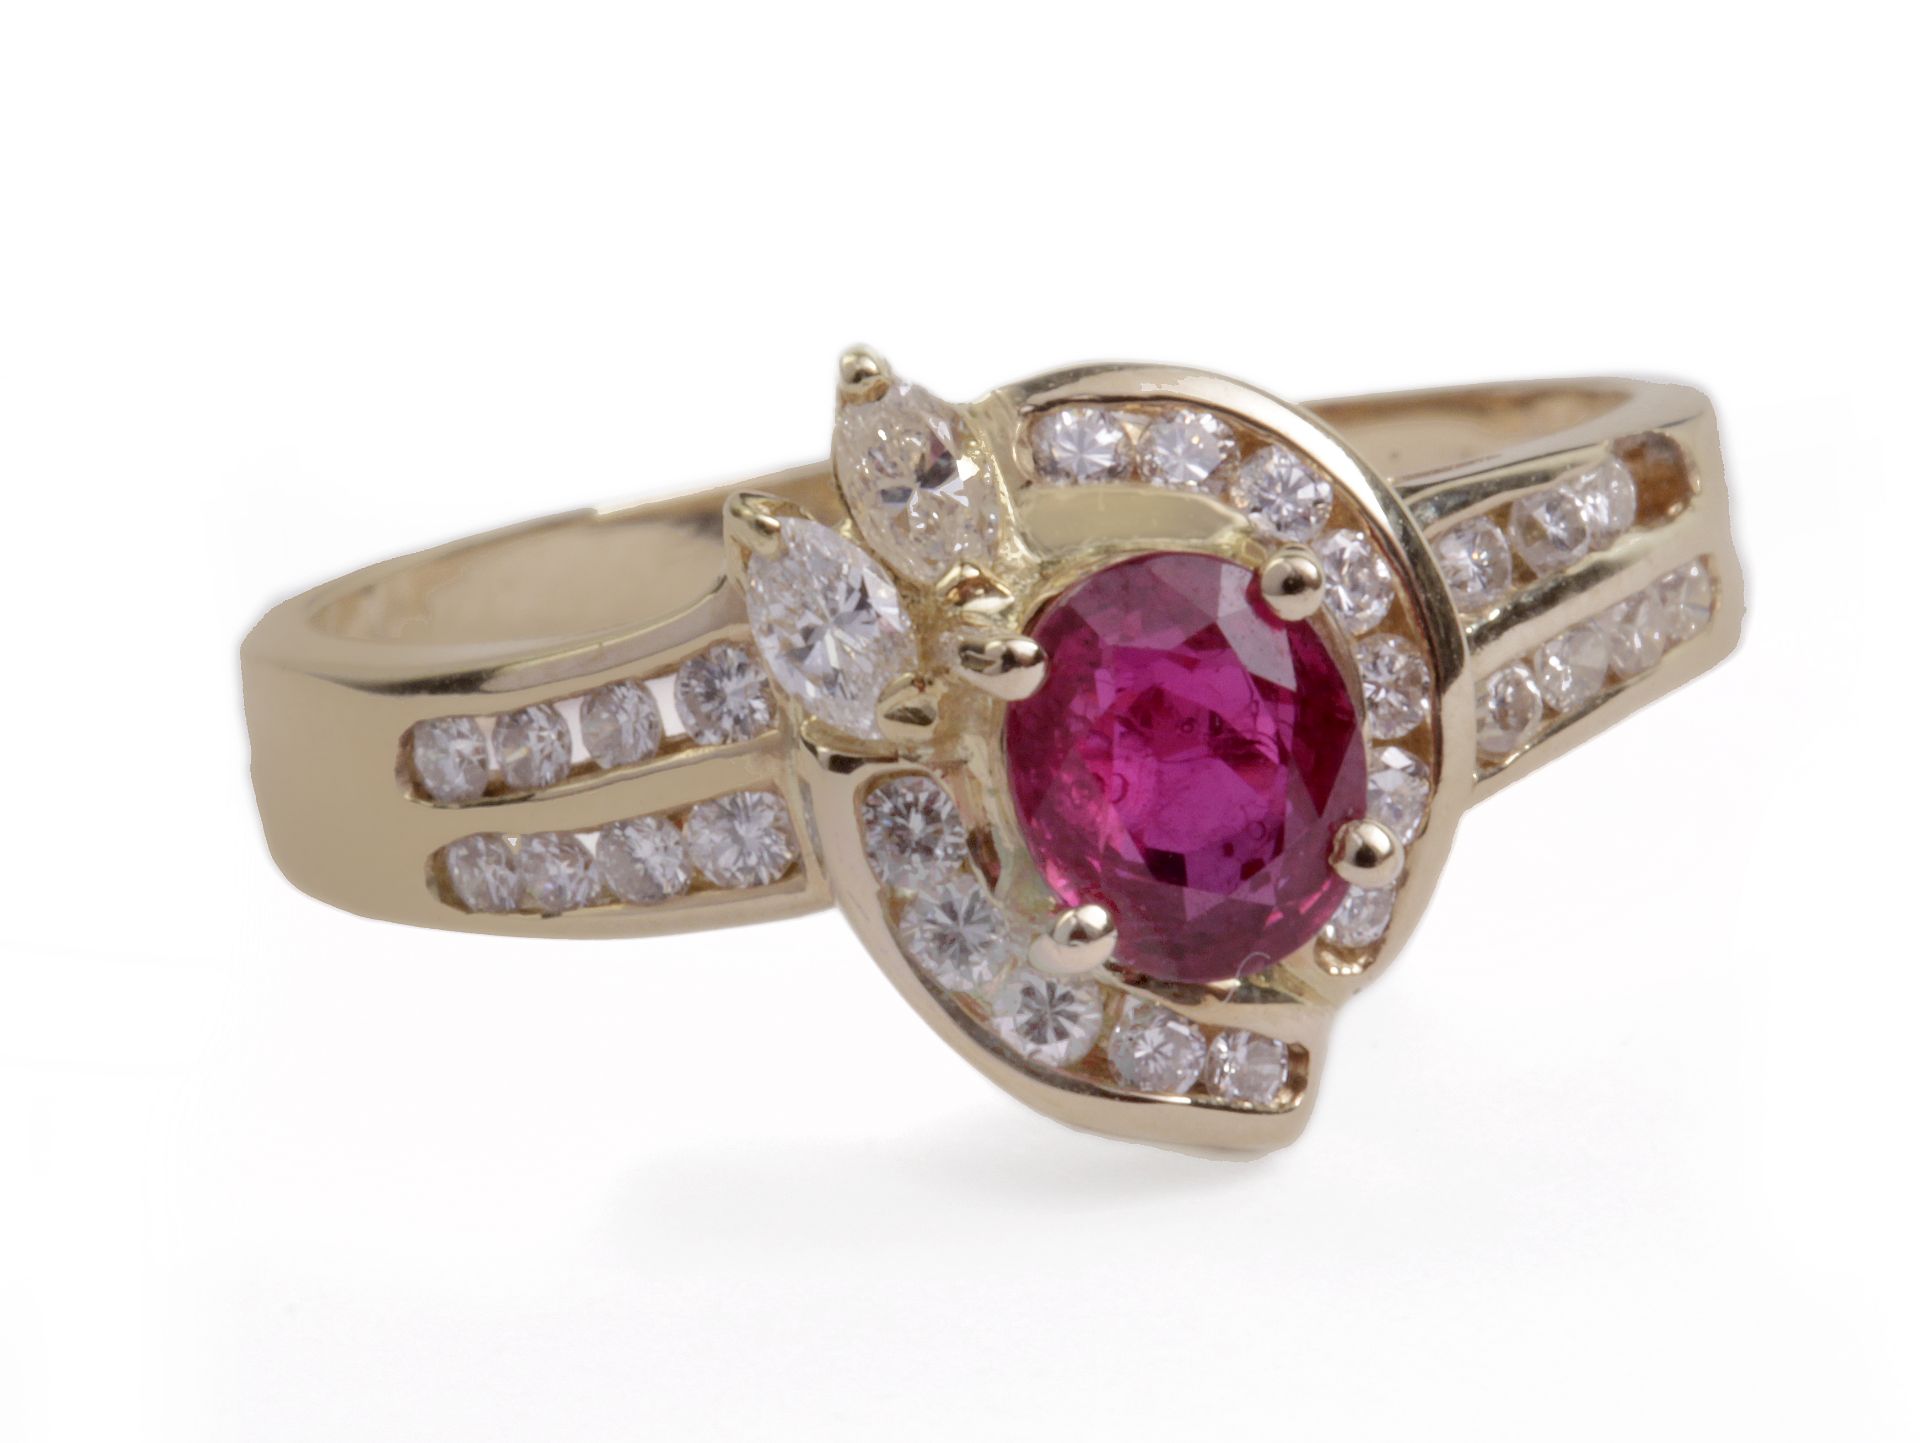 Diamonds and ruby ring with an 18k. yellow gold setting